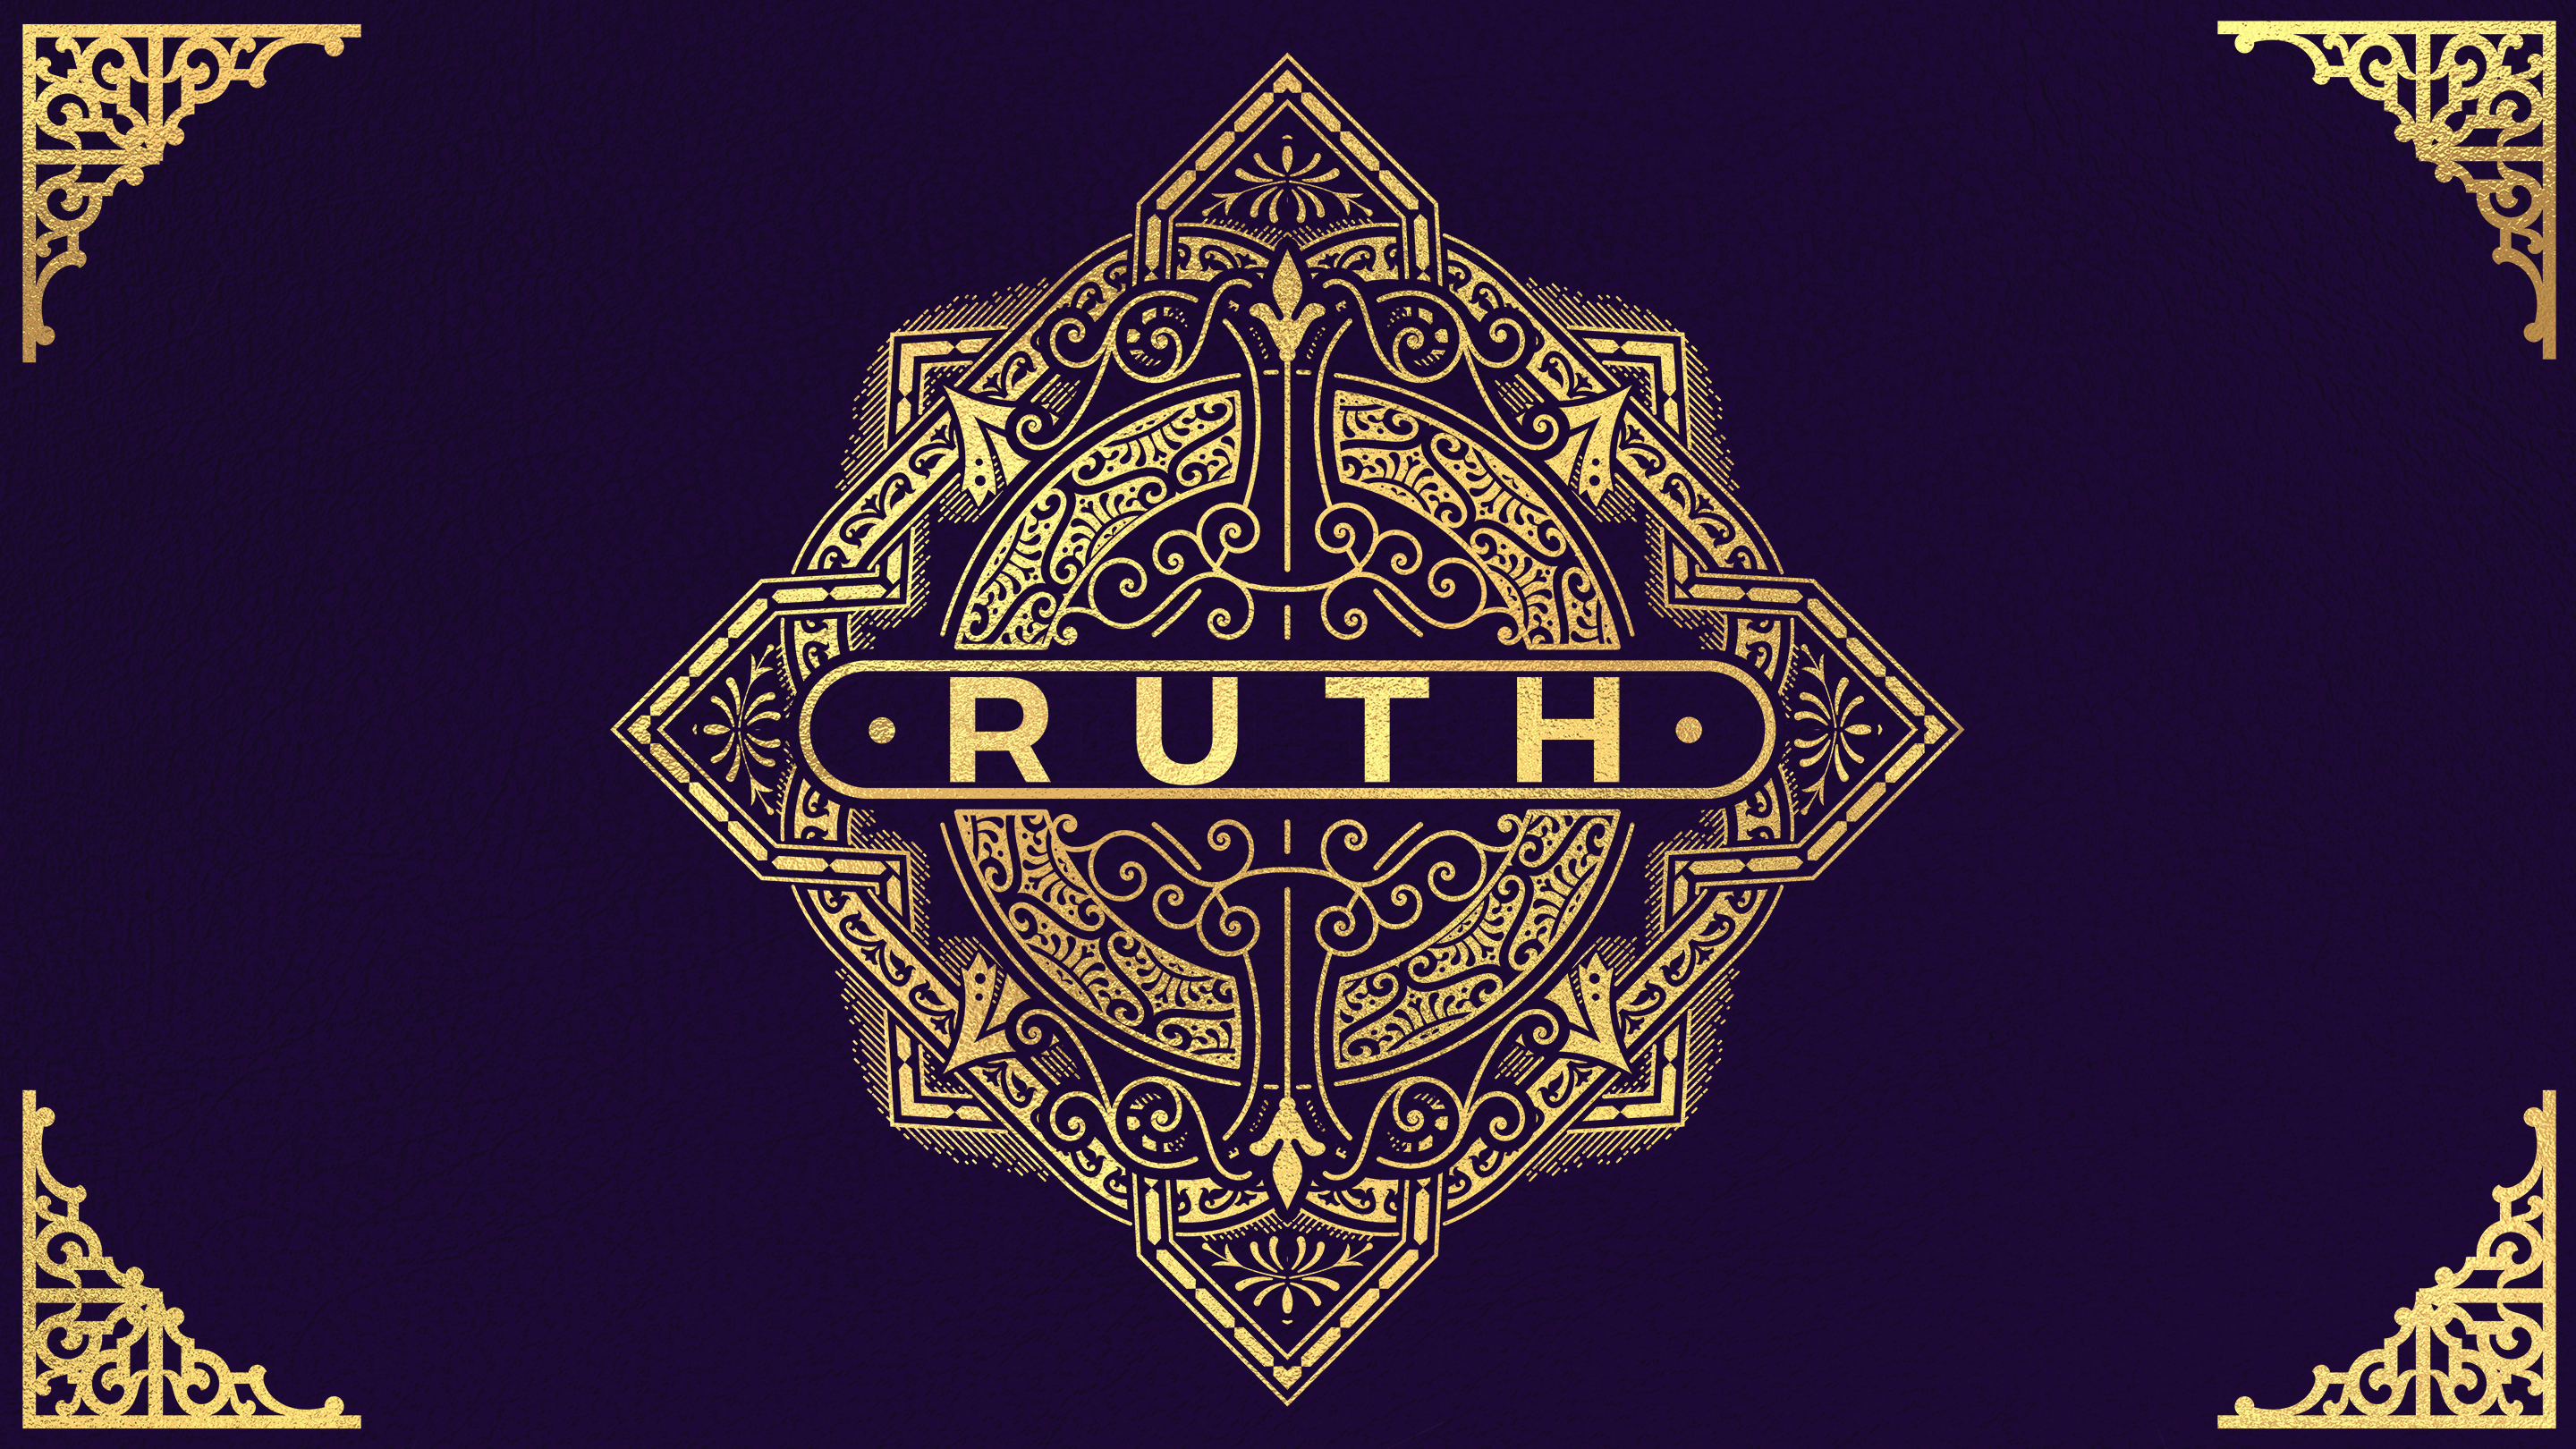 Ruth – Names, Stories, and Promises  (Ruth 4:18-22) 